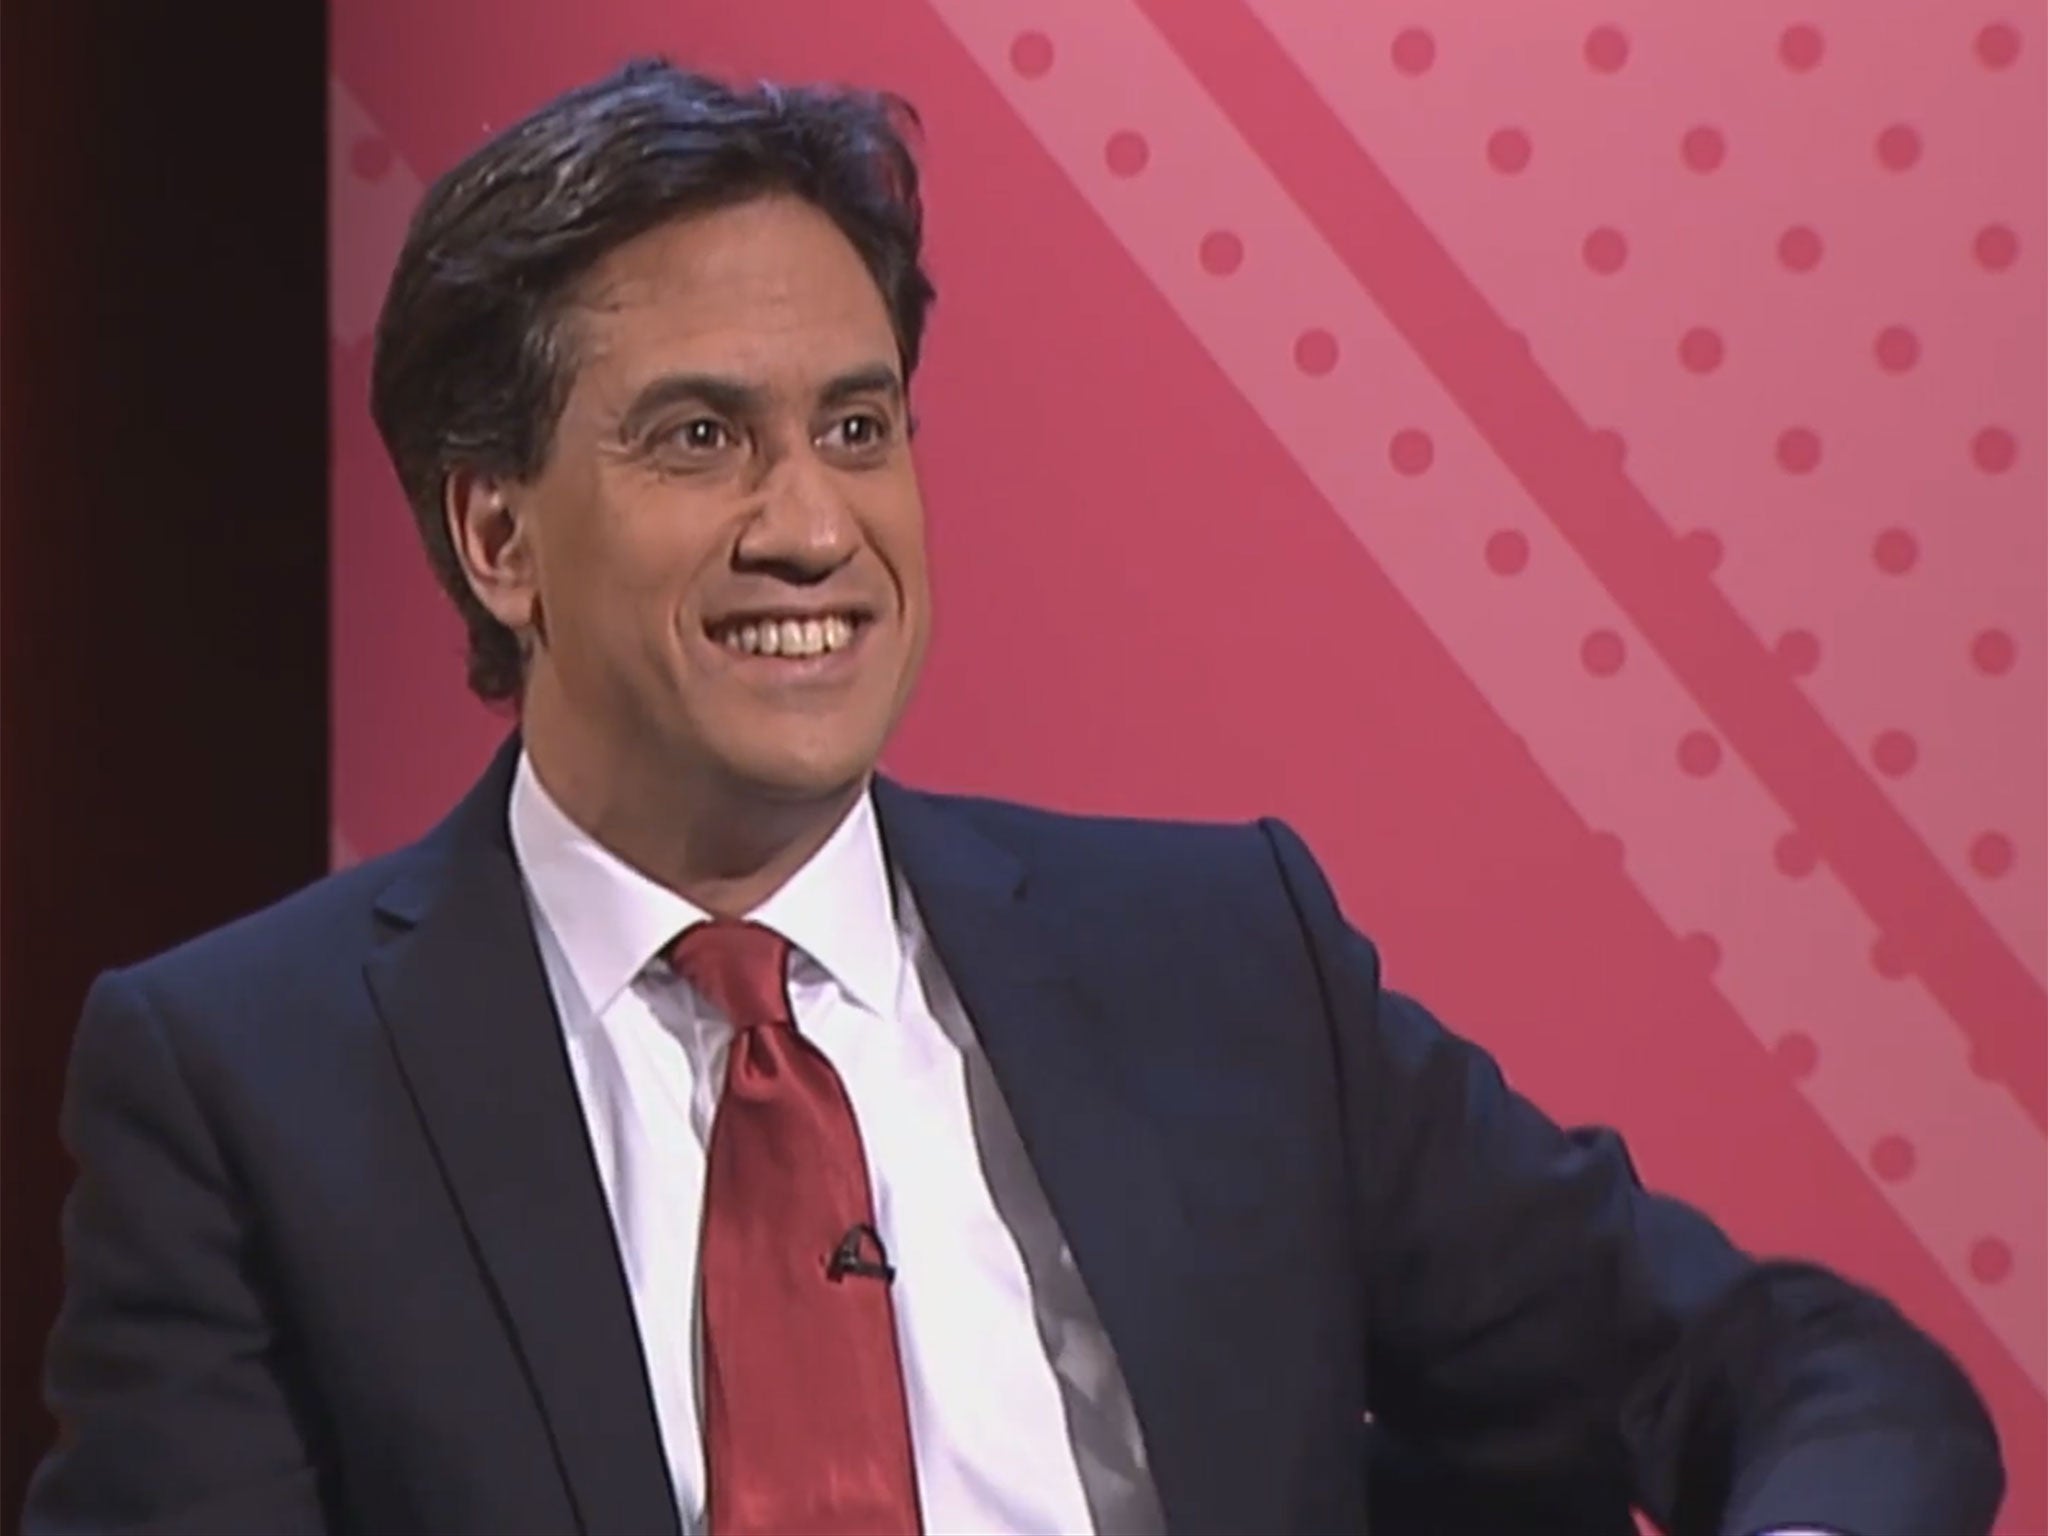 Ed Miliband appears during a debate broadcast on YouTube with 16-24 year-olds